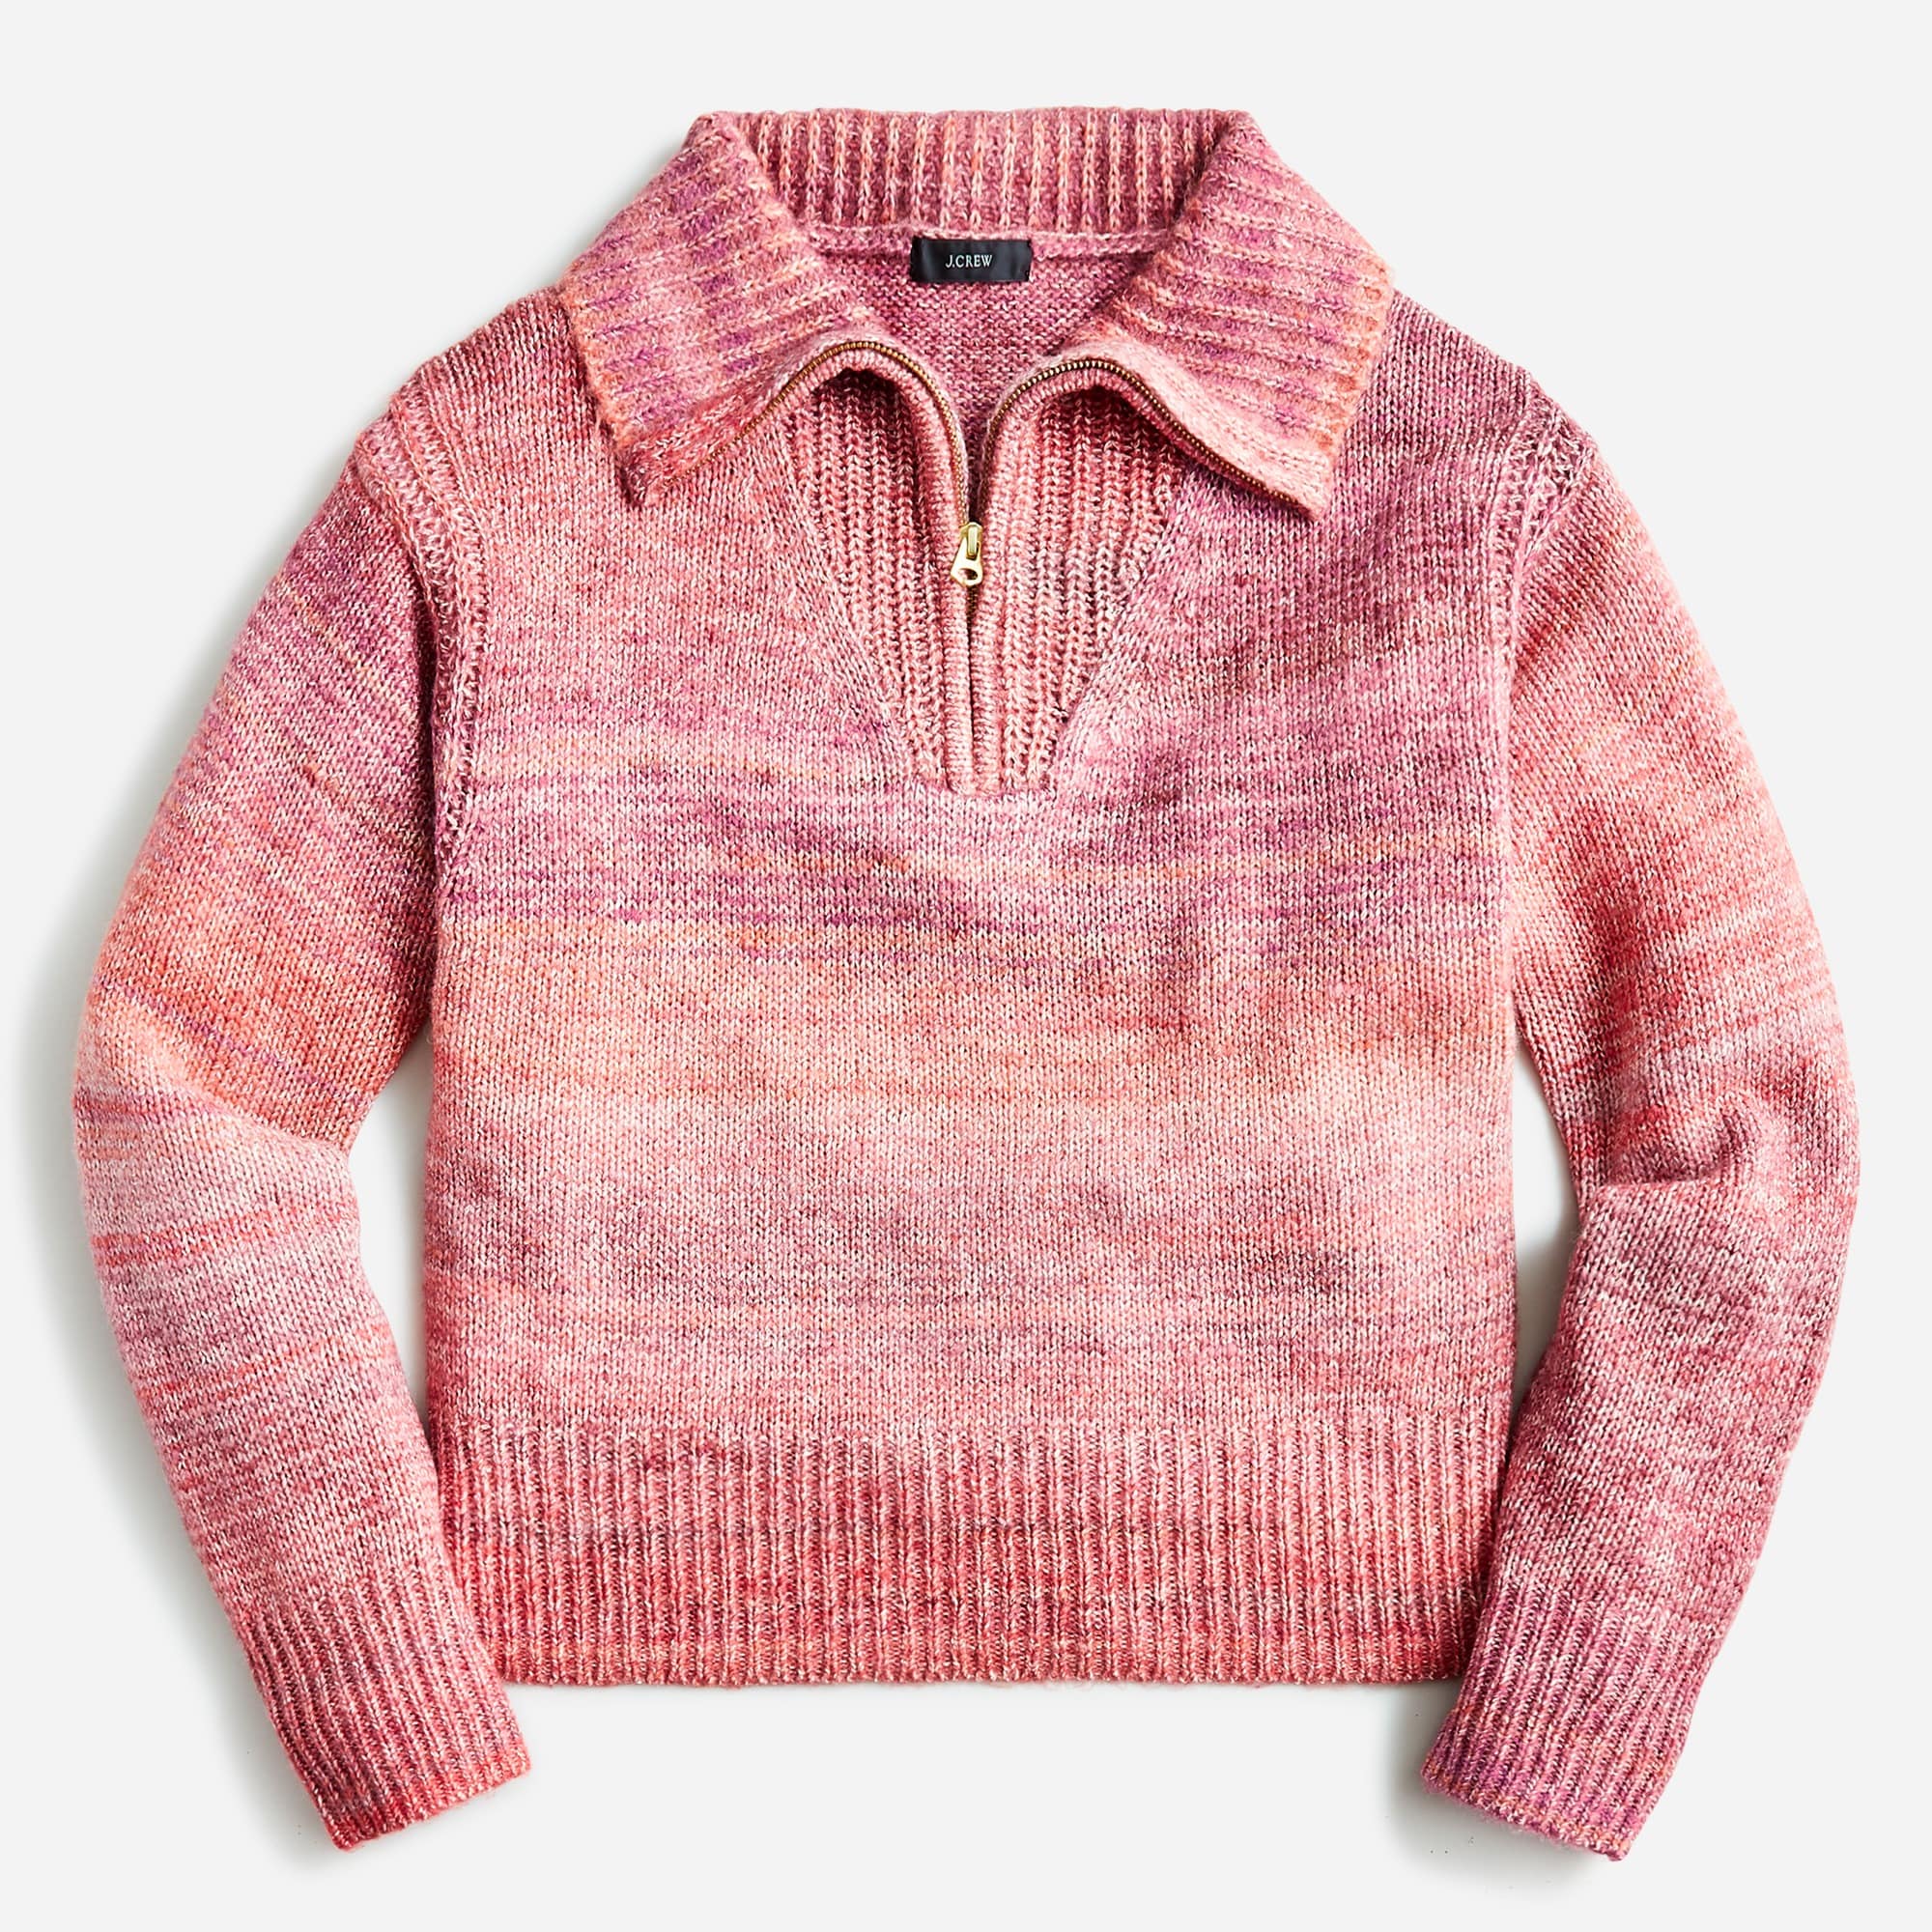 J.Crew: Relaxed Half-zip Stretch Sweater In Space Dye For Women